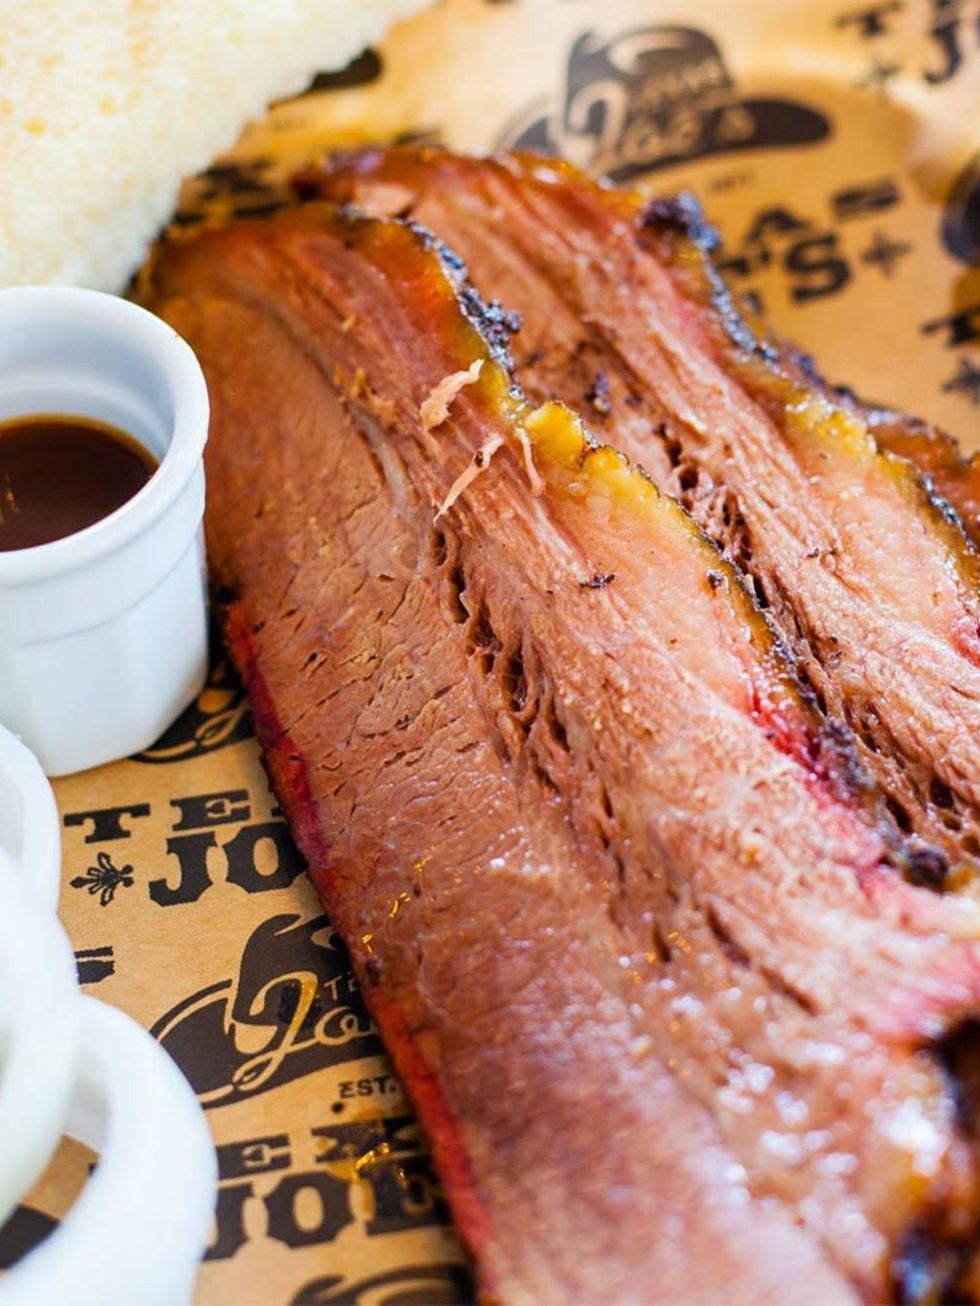 <p><strong>FOOD: Brisket Fest</strong></p>

<p>Sink your teeth into the best BBQ brisket cooked the proper way by the experts.</p>

<p>To try a little of all 8 chefs work order the Ultimate Brisket Sandwich or buy a ticket to get a mouth watering portion